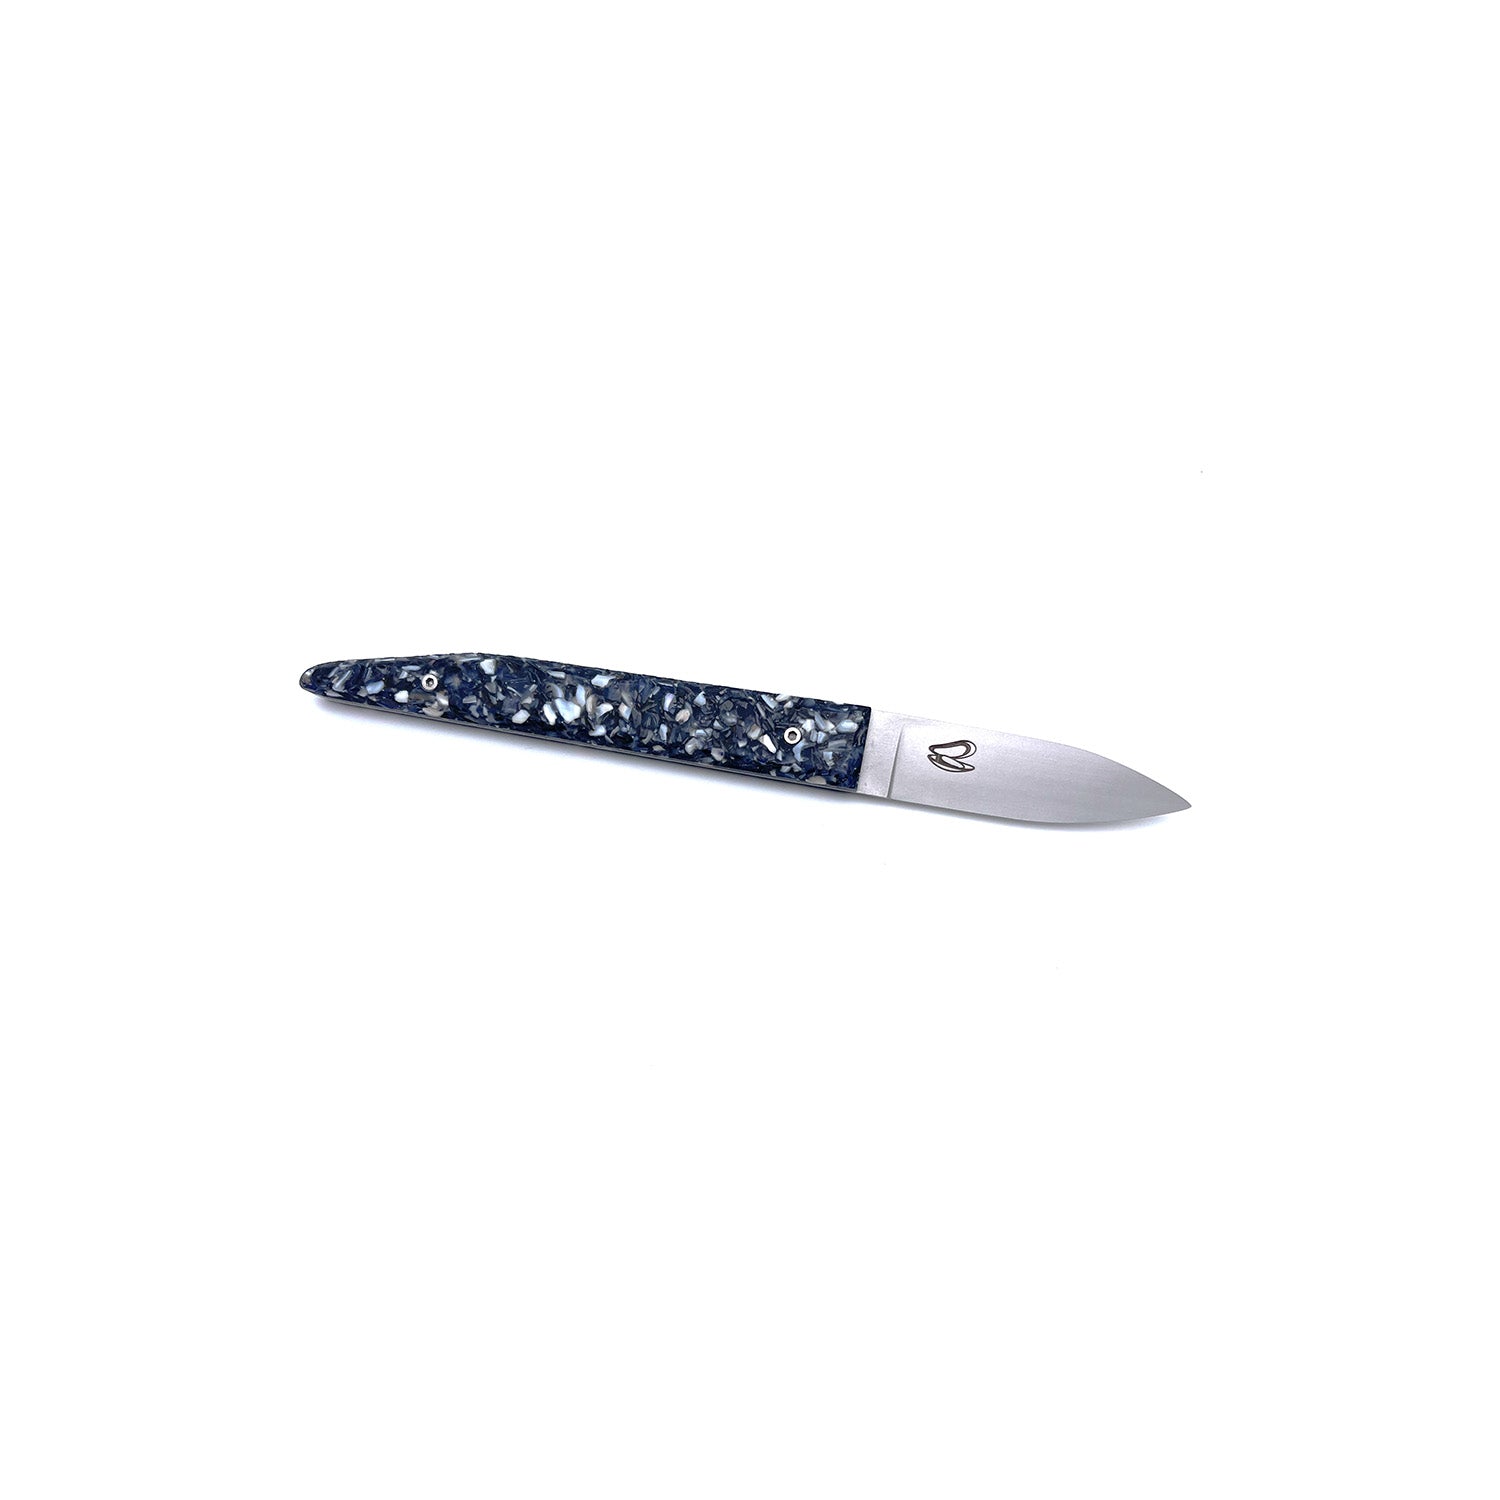 Oyster knife with a handle made from recycled mussel shells